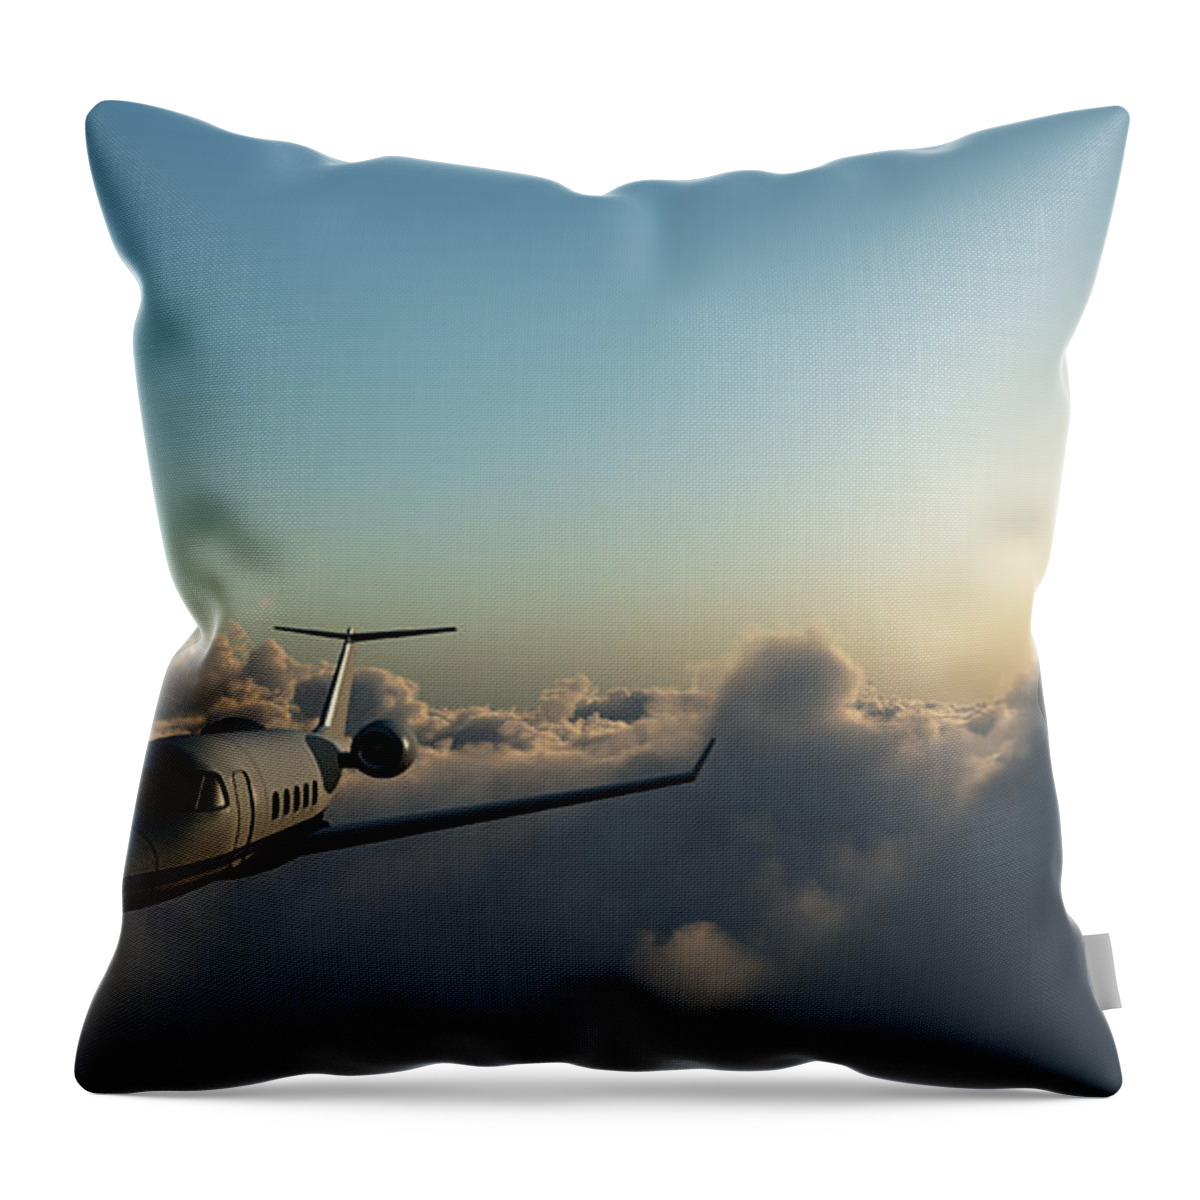 Mid-air Throw Pillow featuring the photograph Learjet 60 Above The Clouds by Joelena